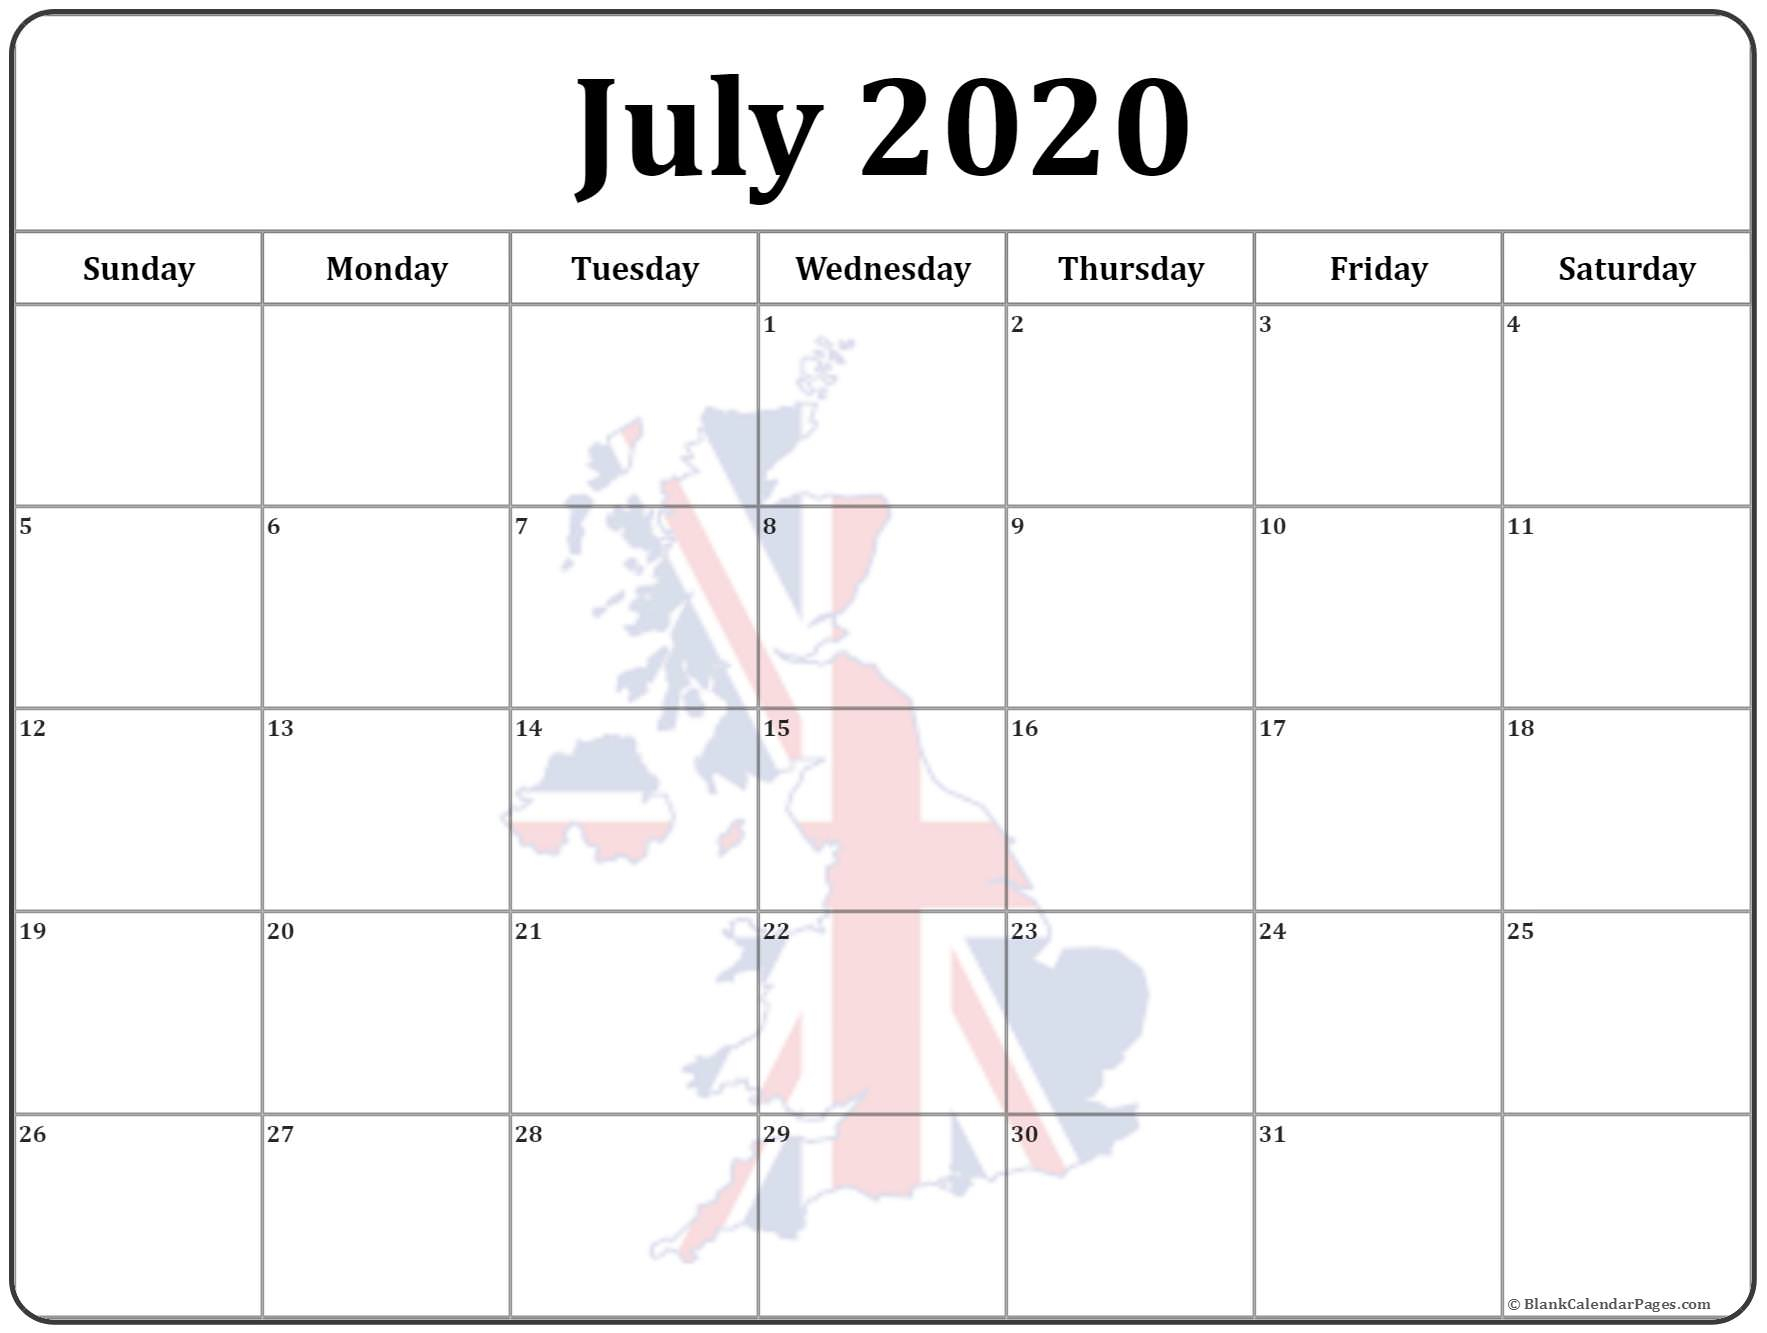 Collection Of July 2020 Photo Calendars With Image Filters.